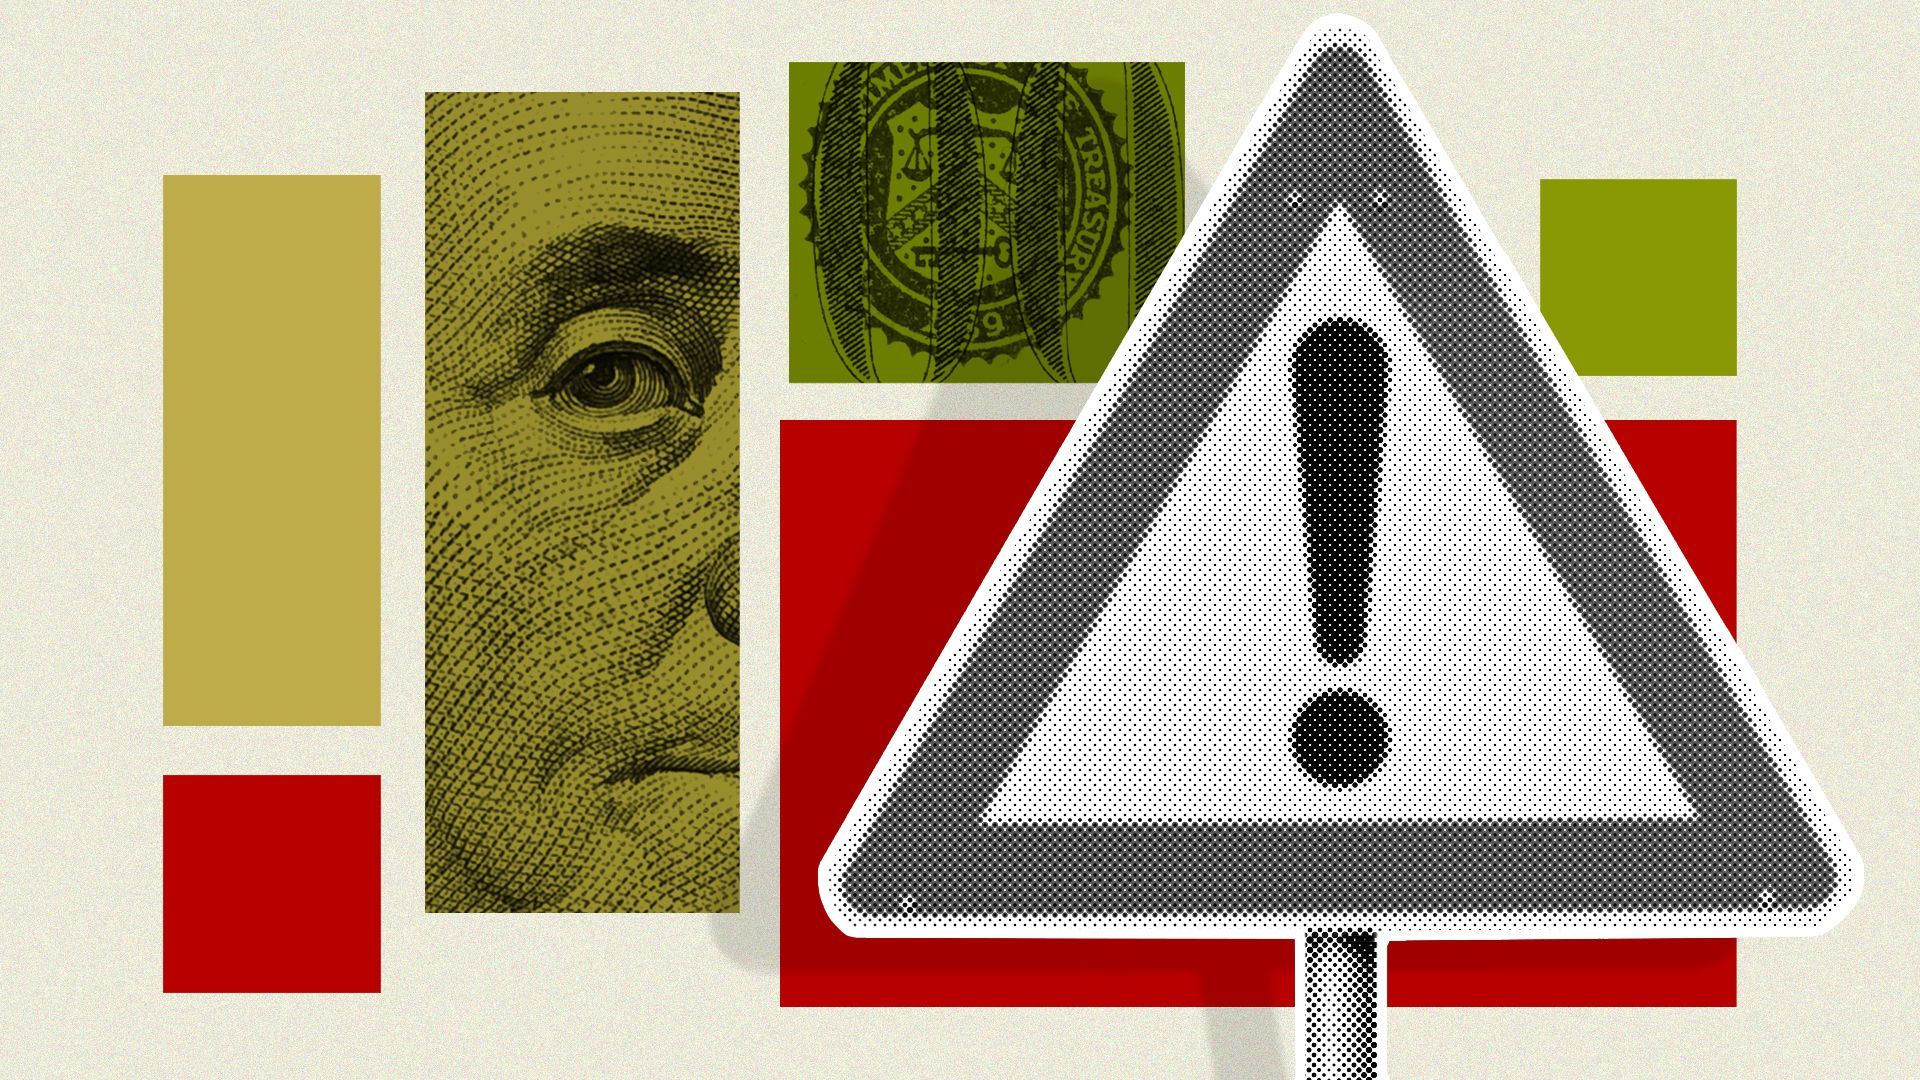 illustration of a caution sign surrounded by red and green rectangles with dollar bills overlaid on them